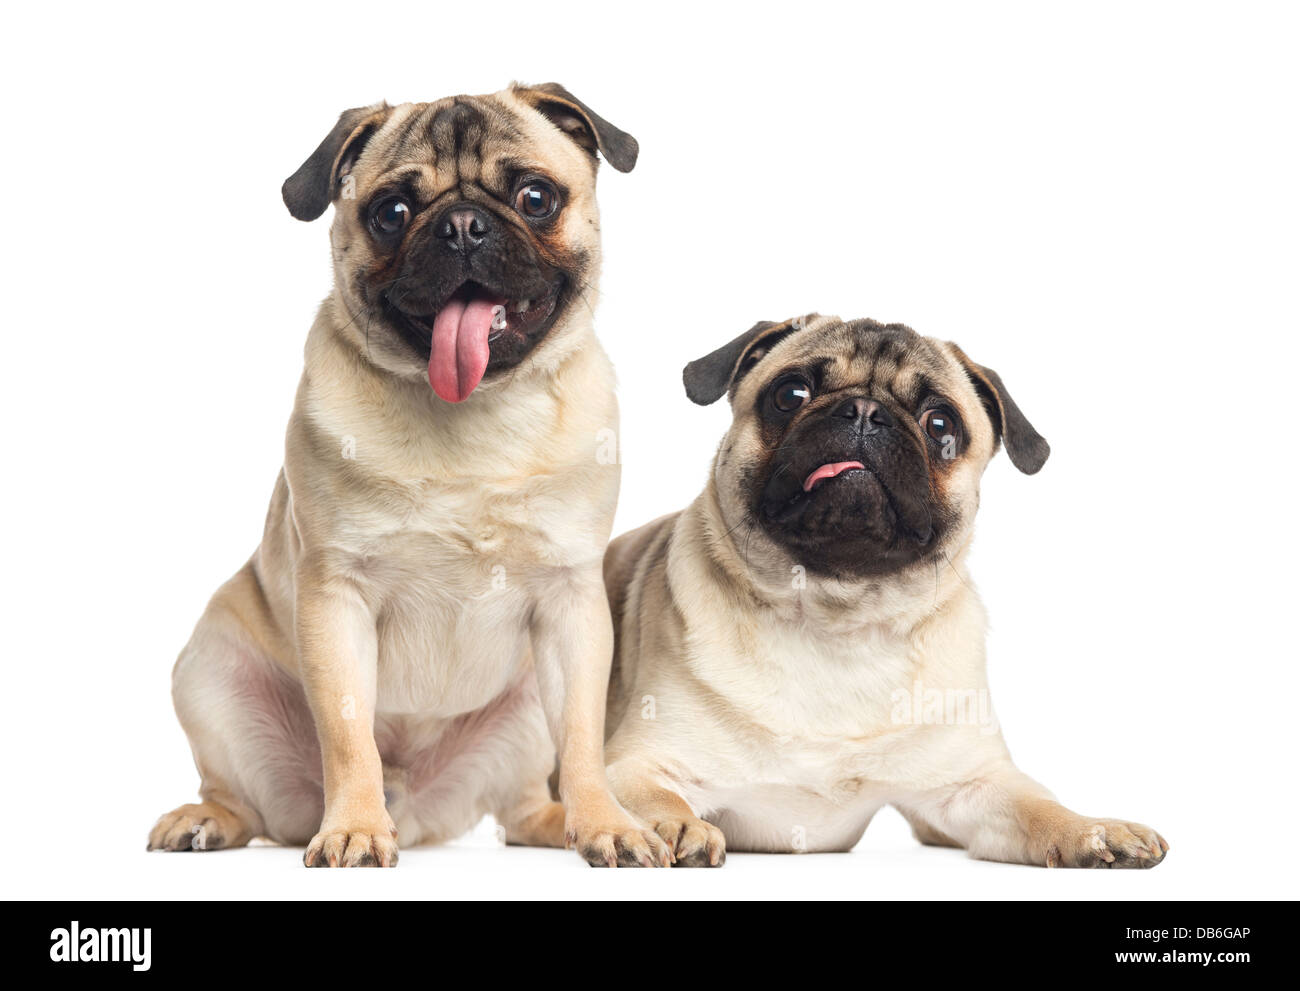 Pugs no people Cut Out Stock Images & Pictures - Alamy